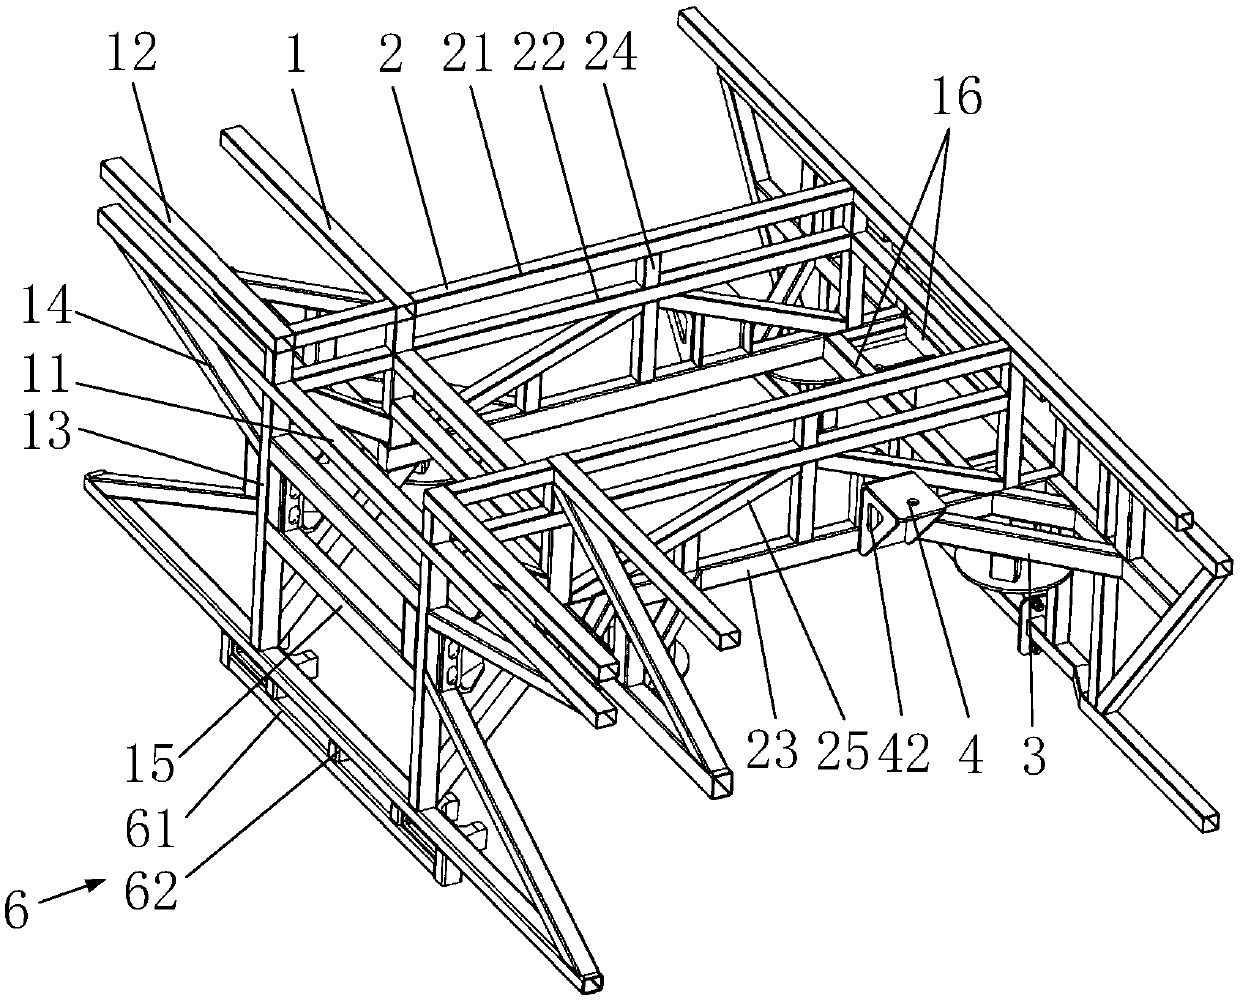 Rear axle frame for buses